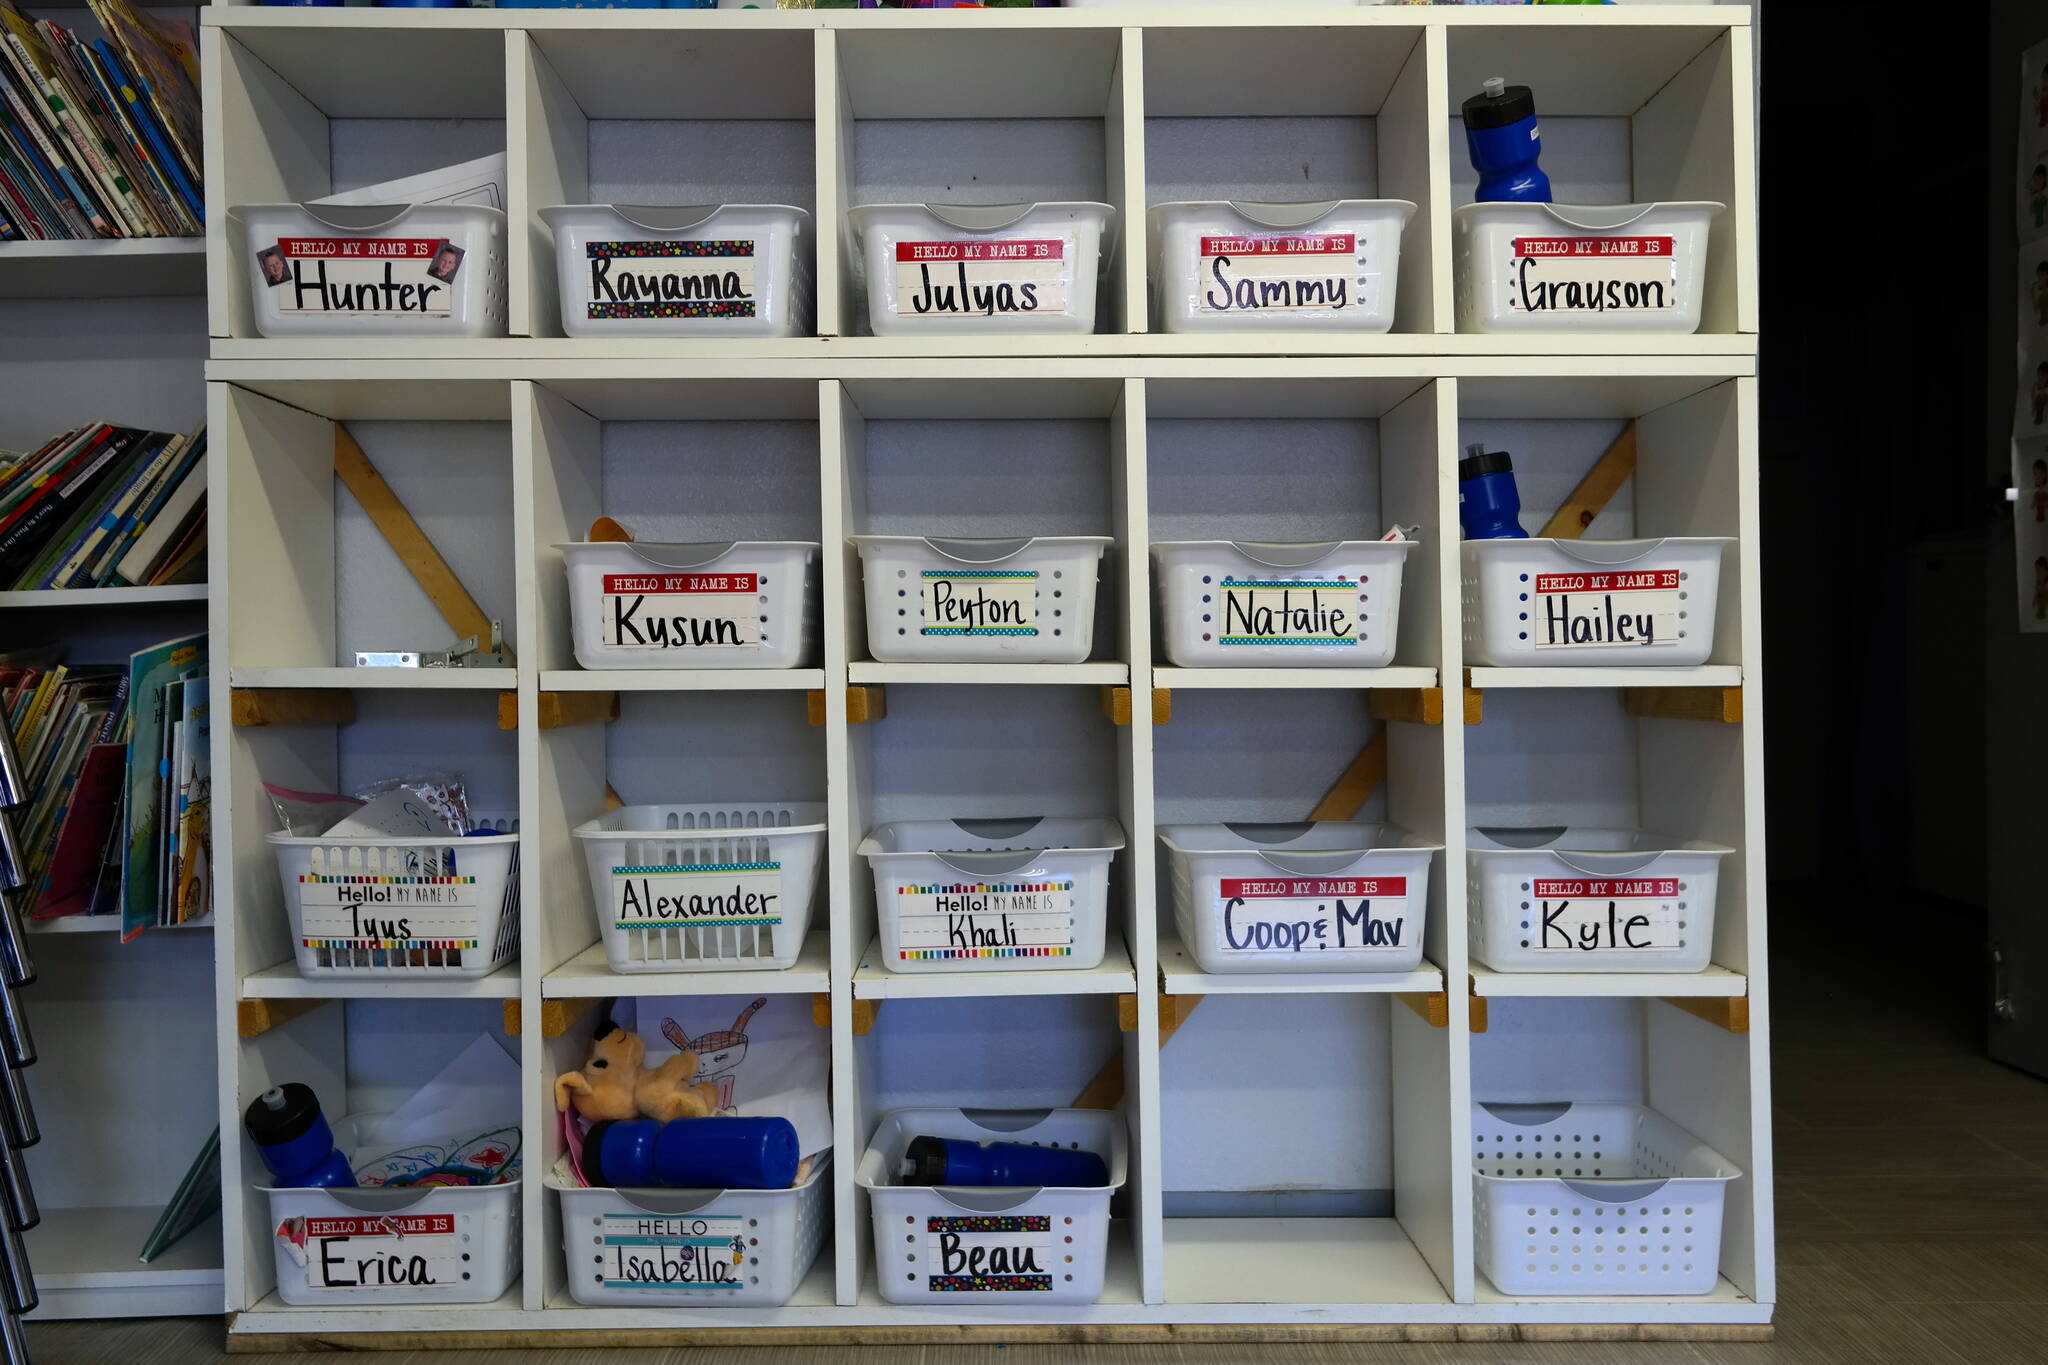 Student drawers in the "Ocean Room" at Tugboat Granny's Childcare and Preschool in Ocean Shores. In 2020, he child care center moved into a building on Ocean Shores Blvd. that is licensed for 36 children from 1-12 years-old. Last year, they added a site located in two classrooms at Ocean Shores Elementary to meet community needs for infant care. Erika Gebhardt I The Daily World